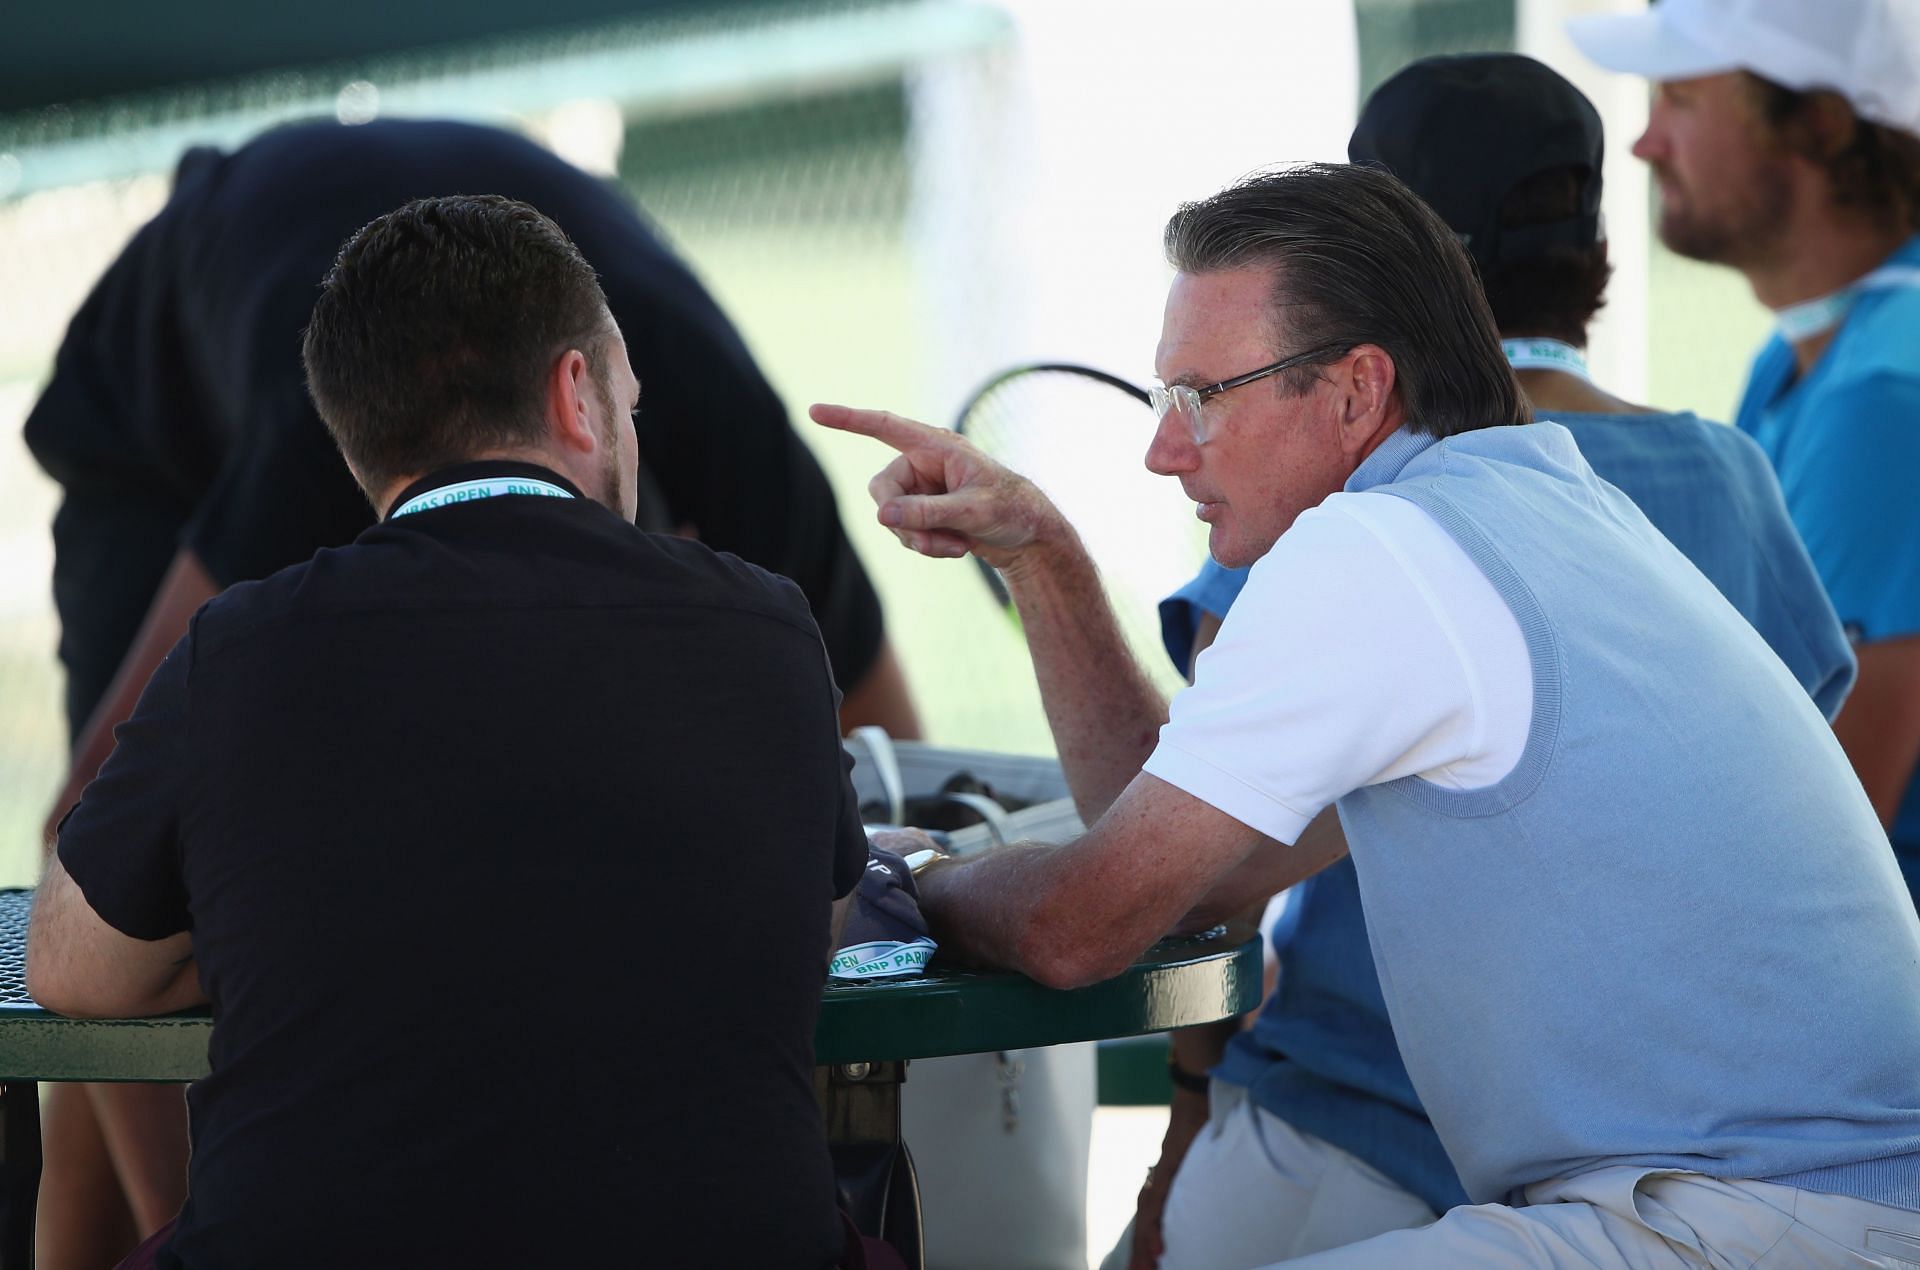 Jimmy Connors at the 2017 BNP Paribas Open